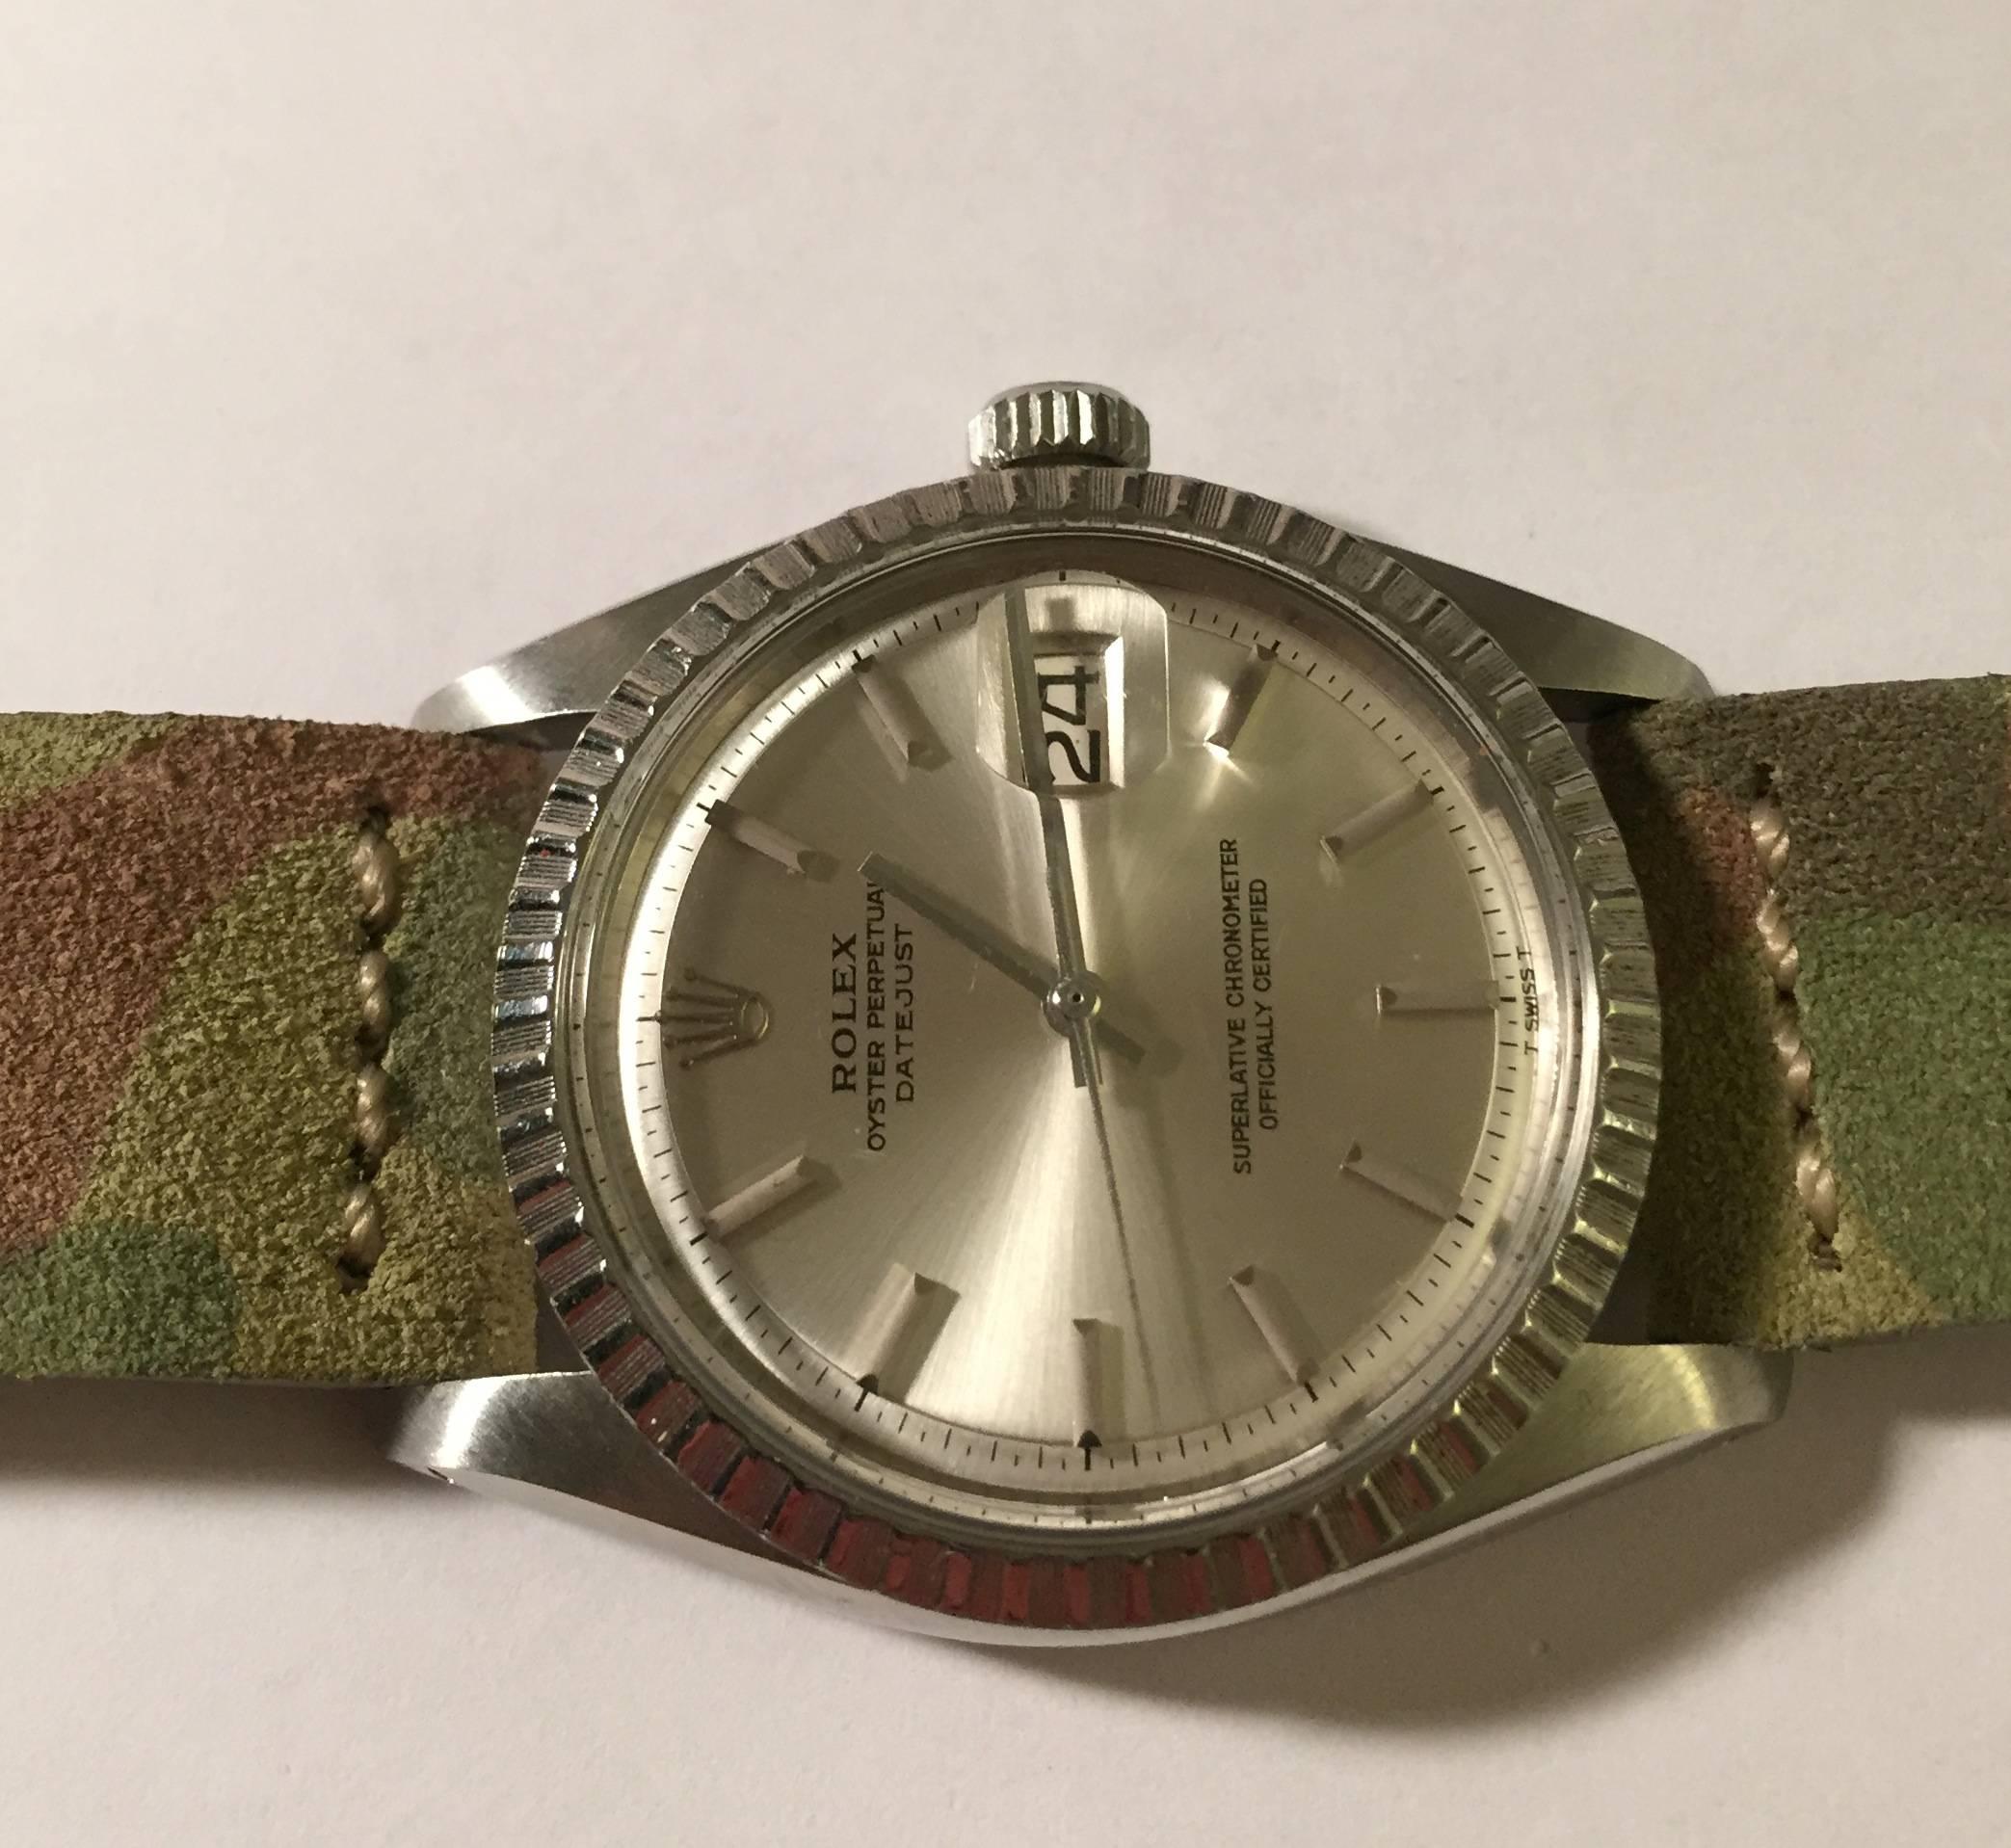 Women's or Men's Rolex Vintage Stainless Steel Oyster Perpetual Datejust Camo Band Wristwatch